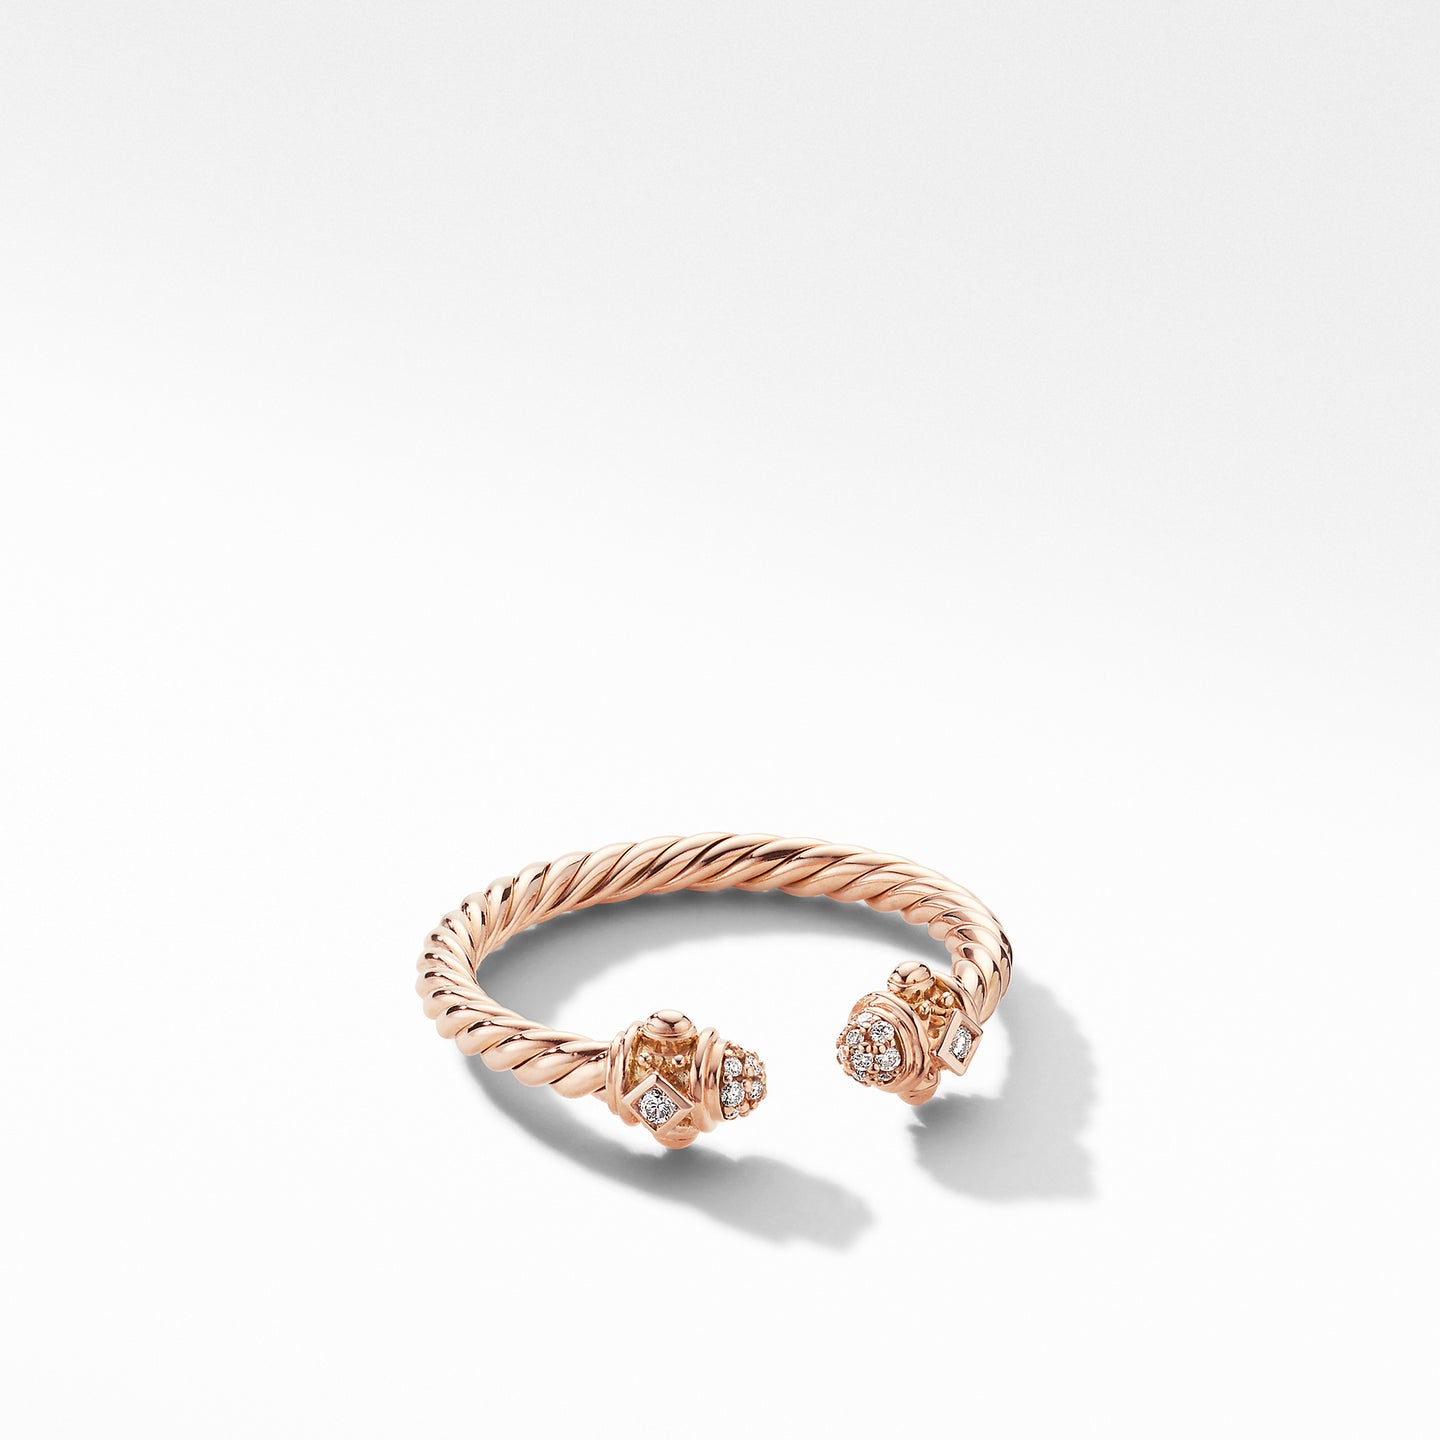 Renaissance Ring in 18K Rose Gold with Diamonds, Size 7